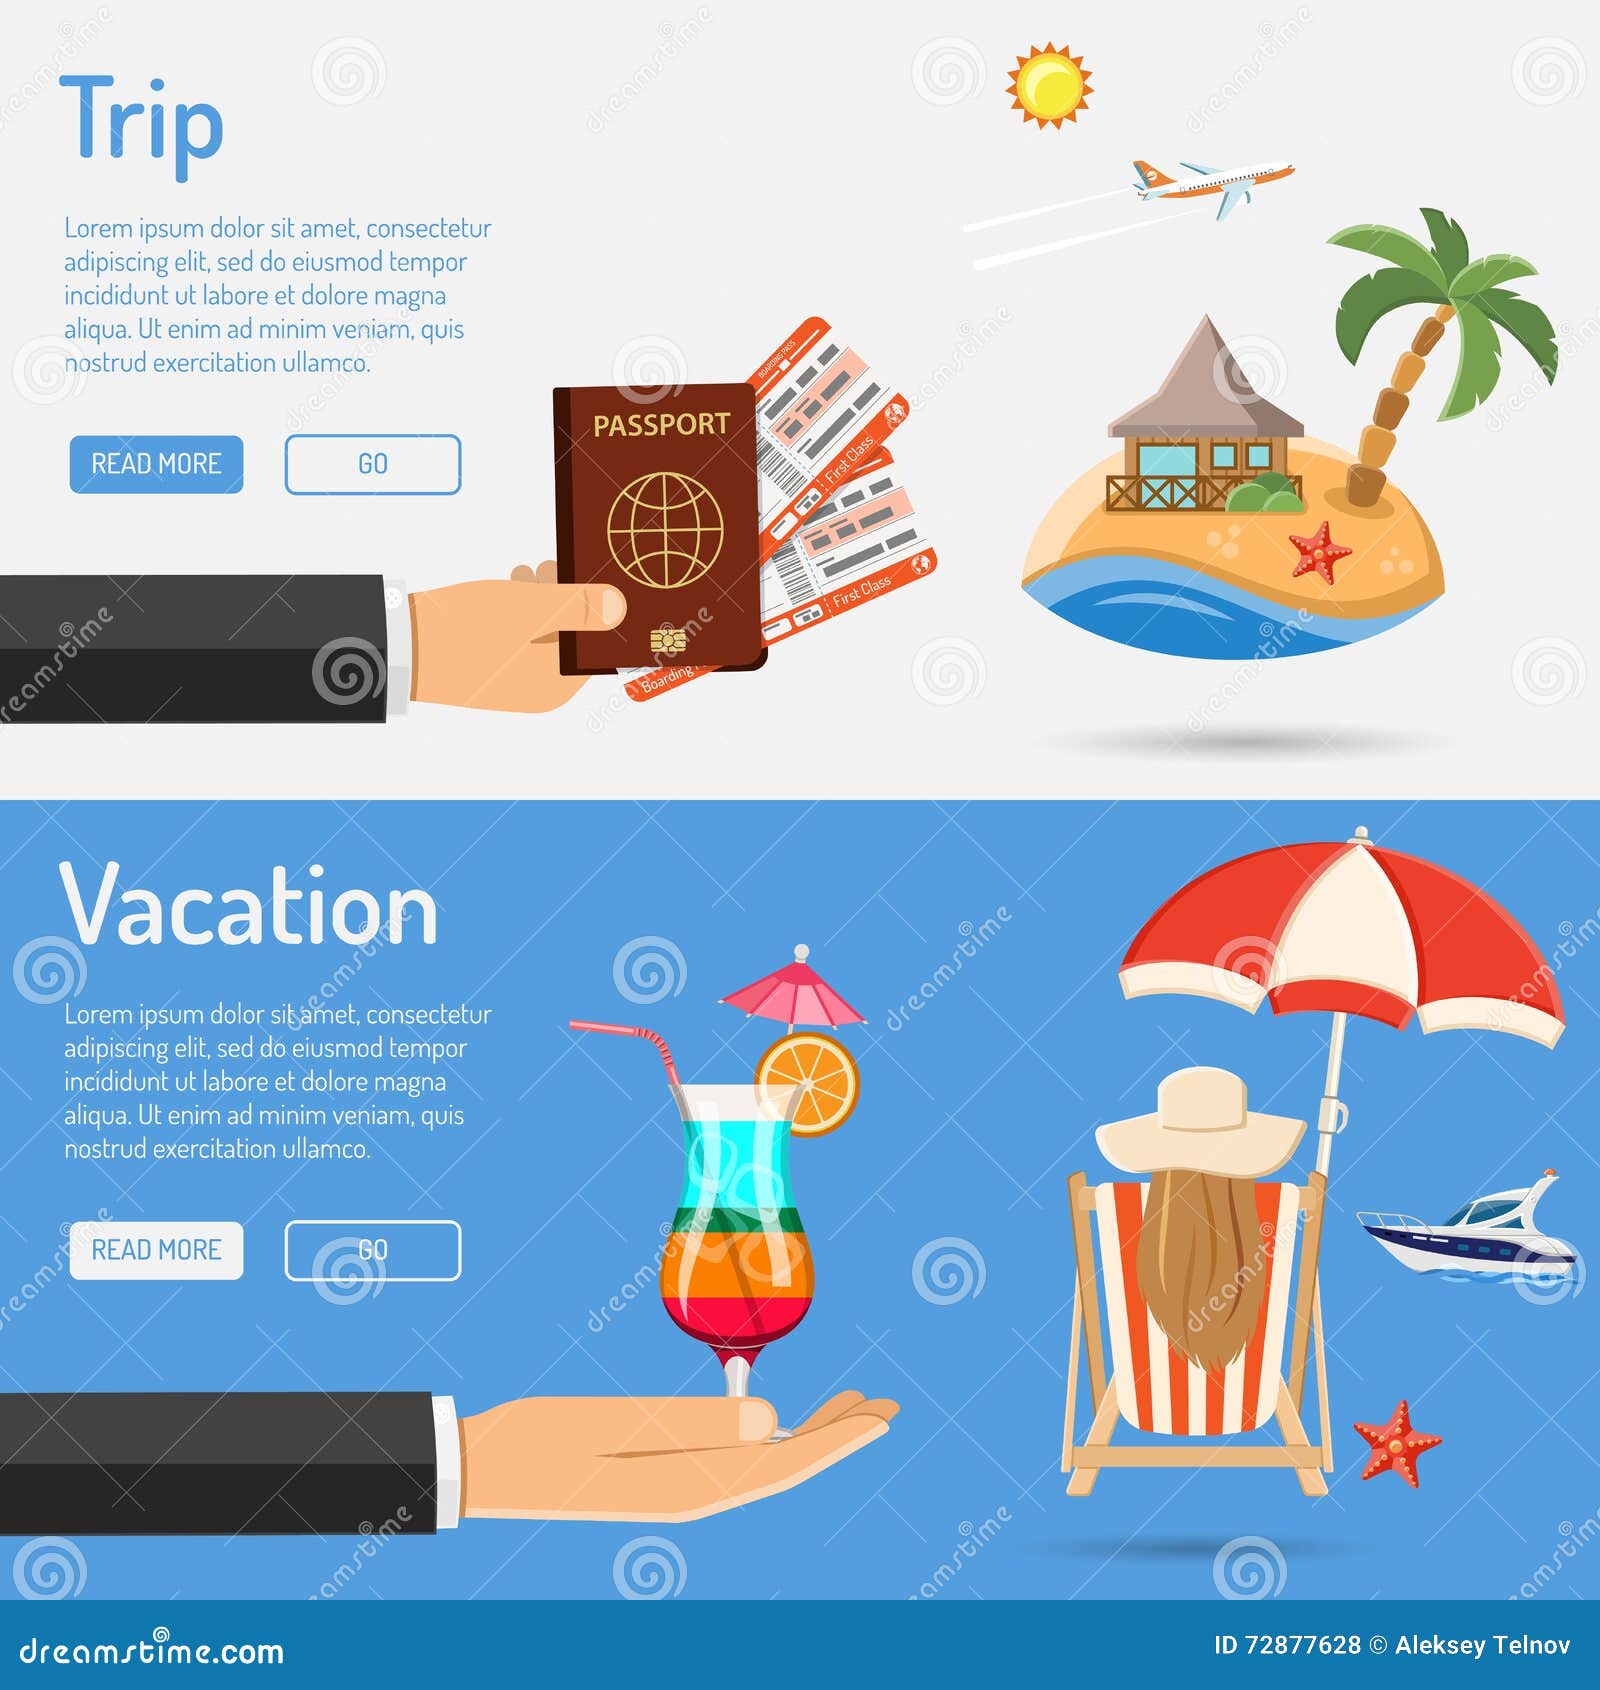 Vacation and Trip Banners stock vector. Illustration of palm - 72877628